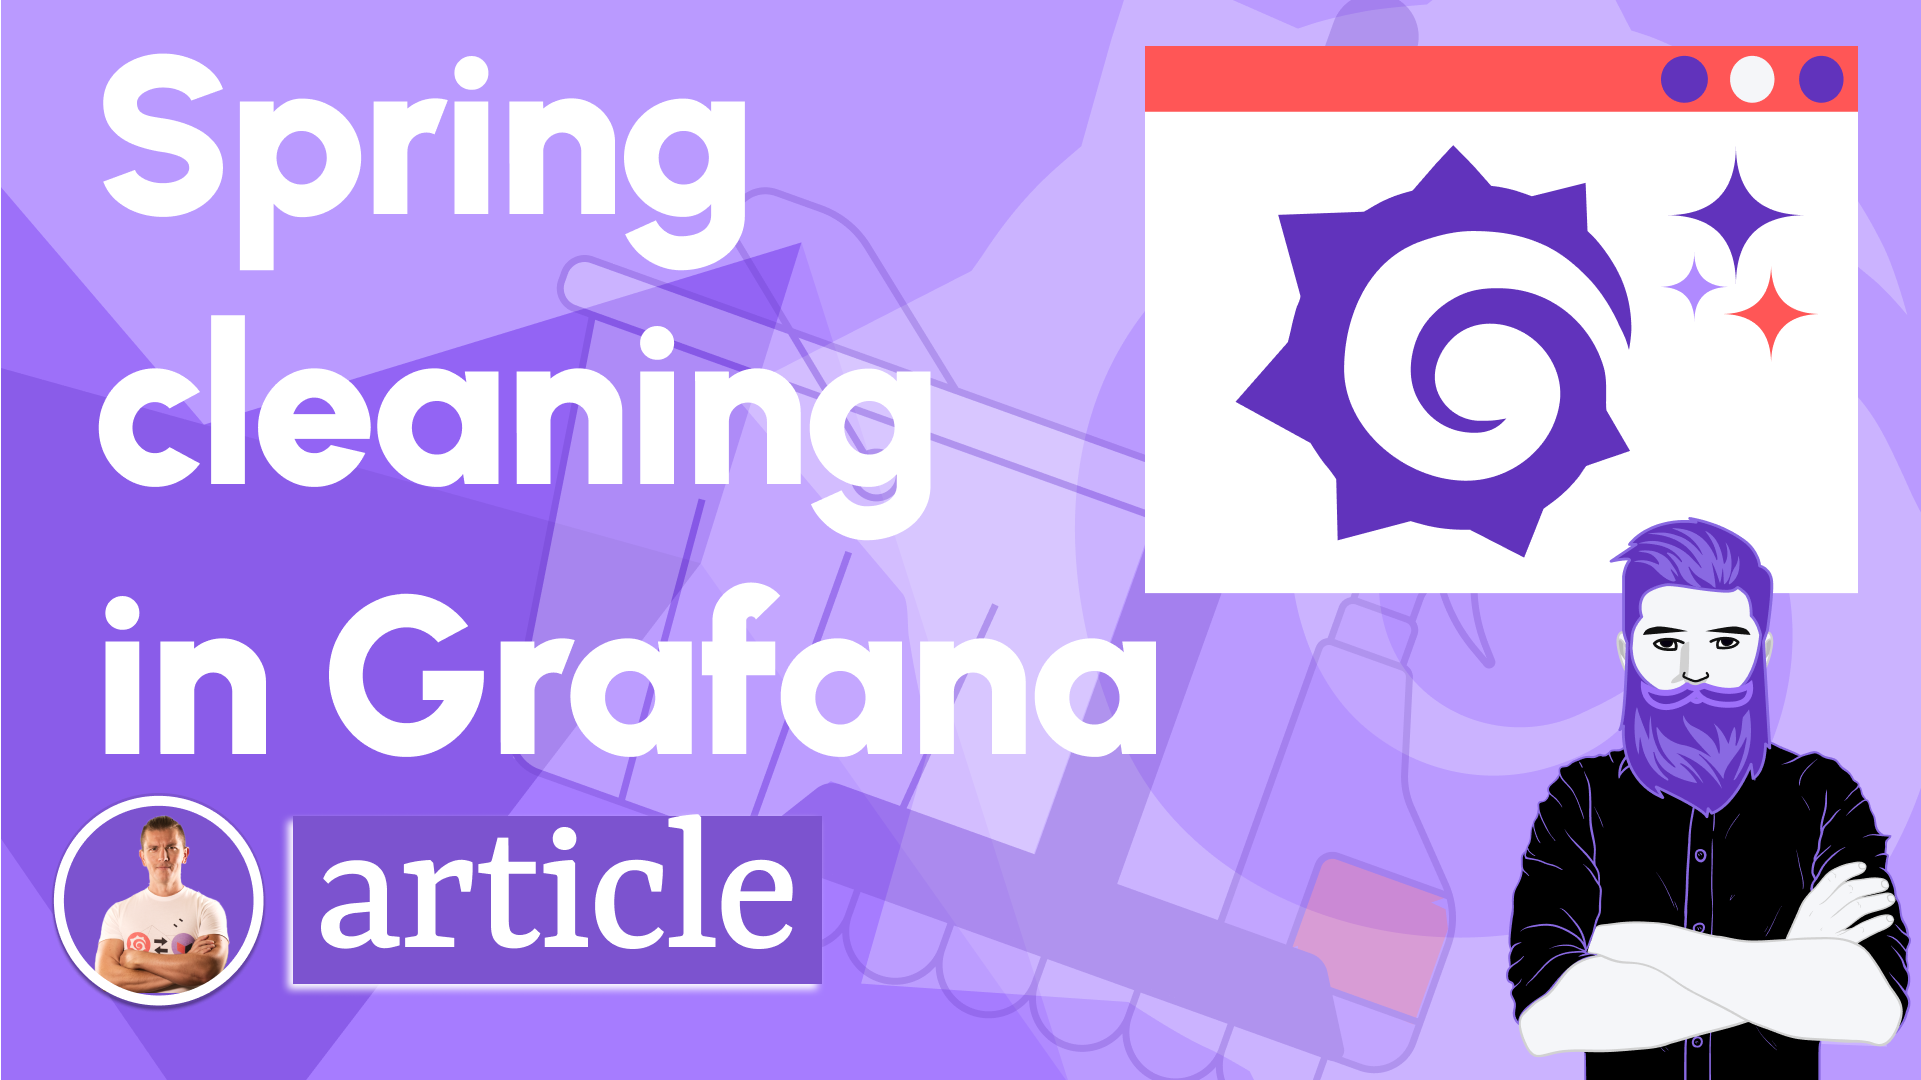 Hey, it is time for spring cleaning your Grafana